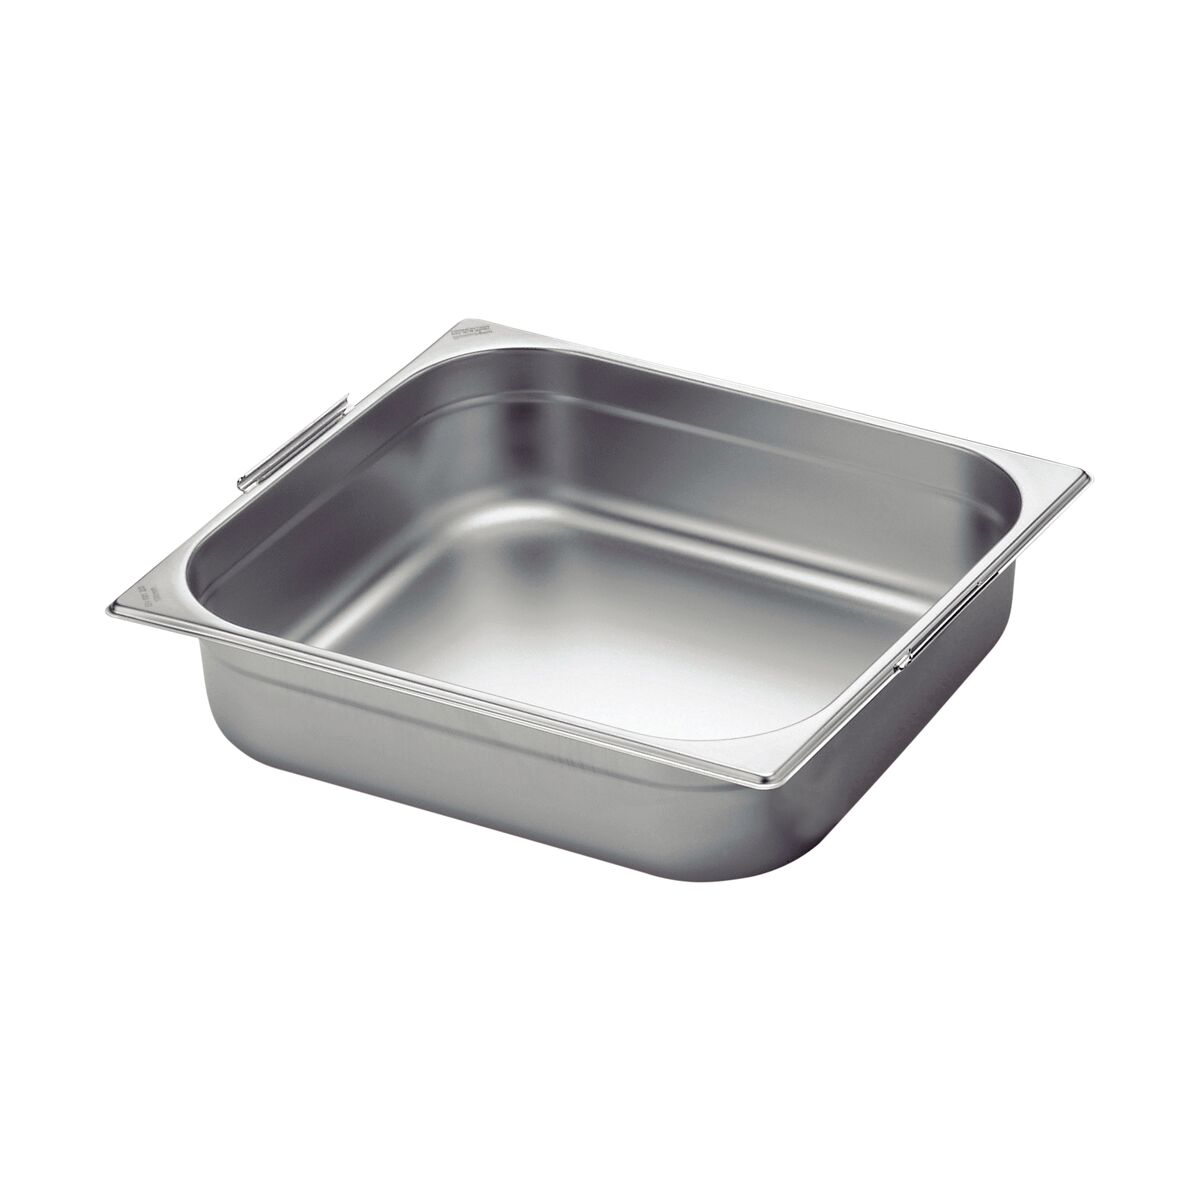 Tramontina GN 2/3 stainless steel food pan with retractable handles, 65 mm deep - Steel 304